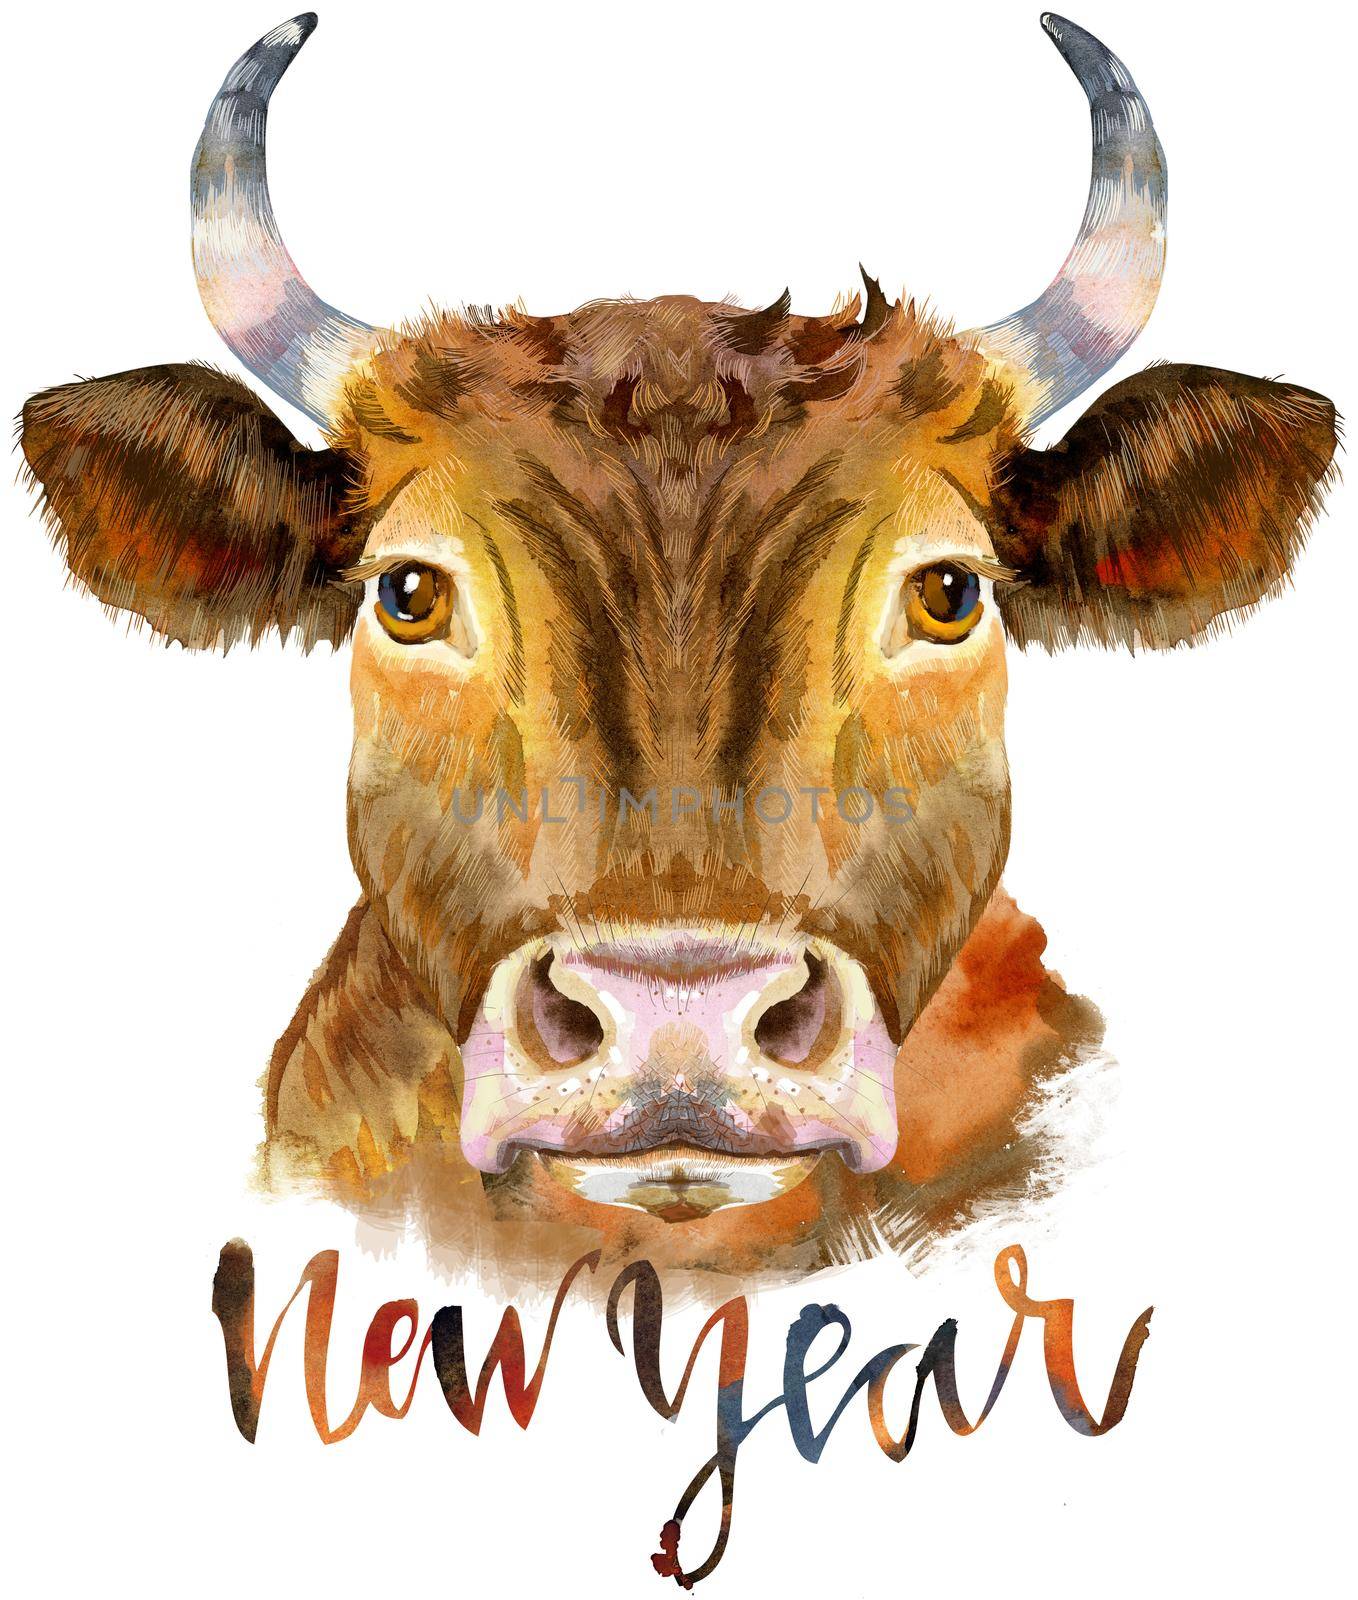 Bull with the inscription New Year. Watercolor graphics. Bull animal illustration with splash watercolor textured background.